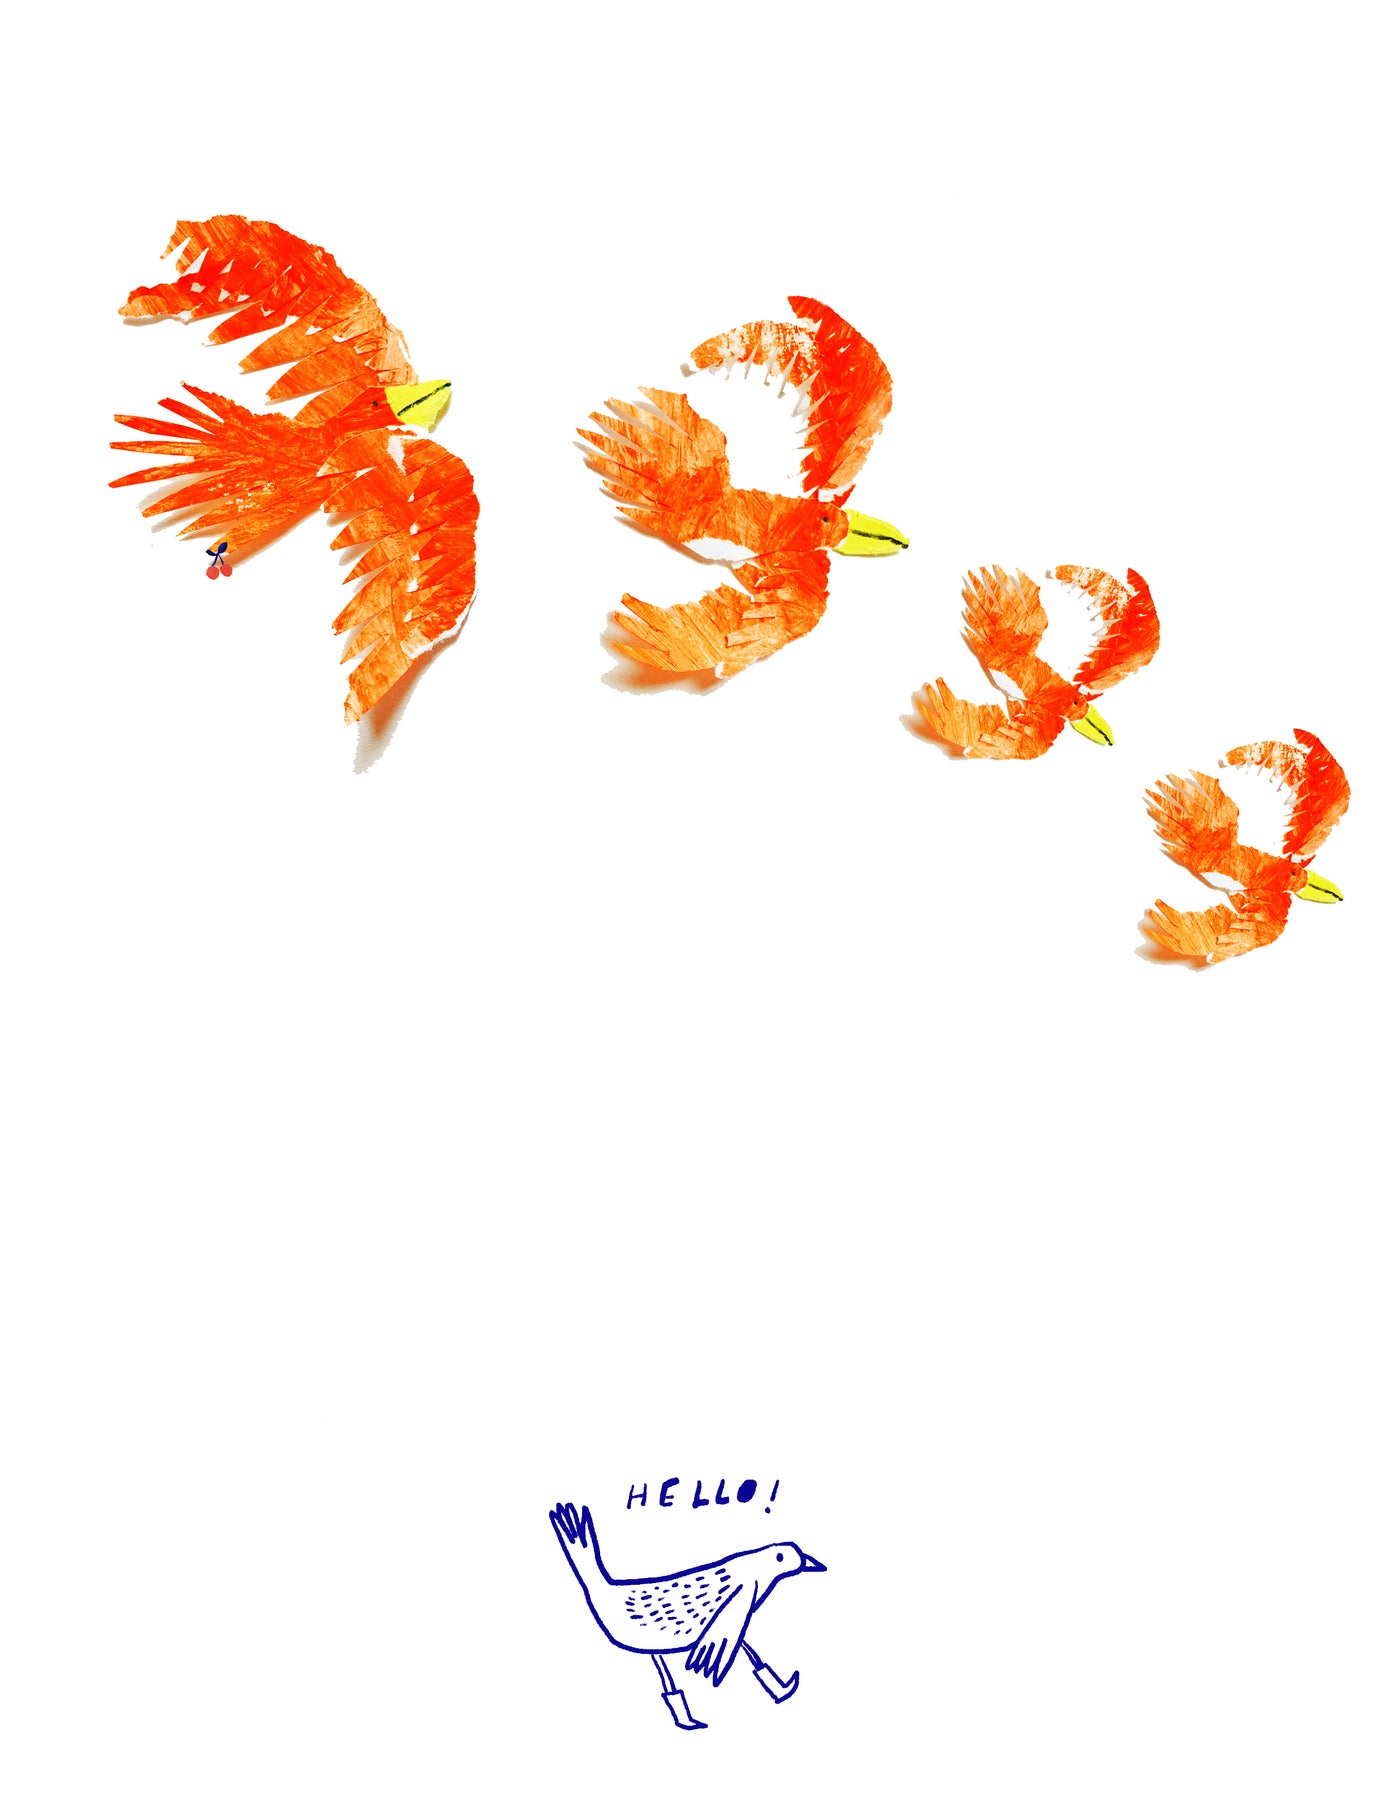 A mixed media illustration by Auracherrybag that contains a phoenix moving across a white background. A chicken is at the bottom of the page above which is the word 'Hello'